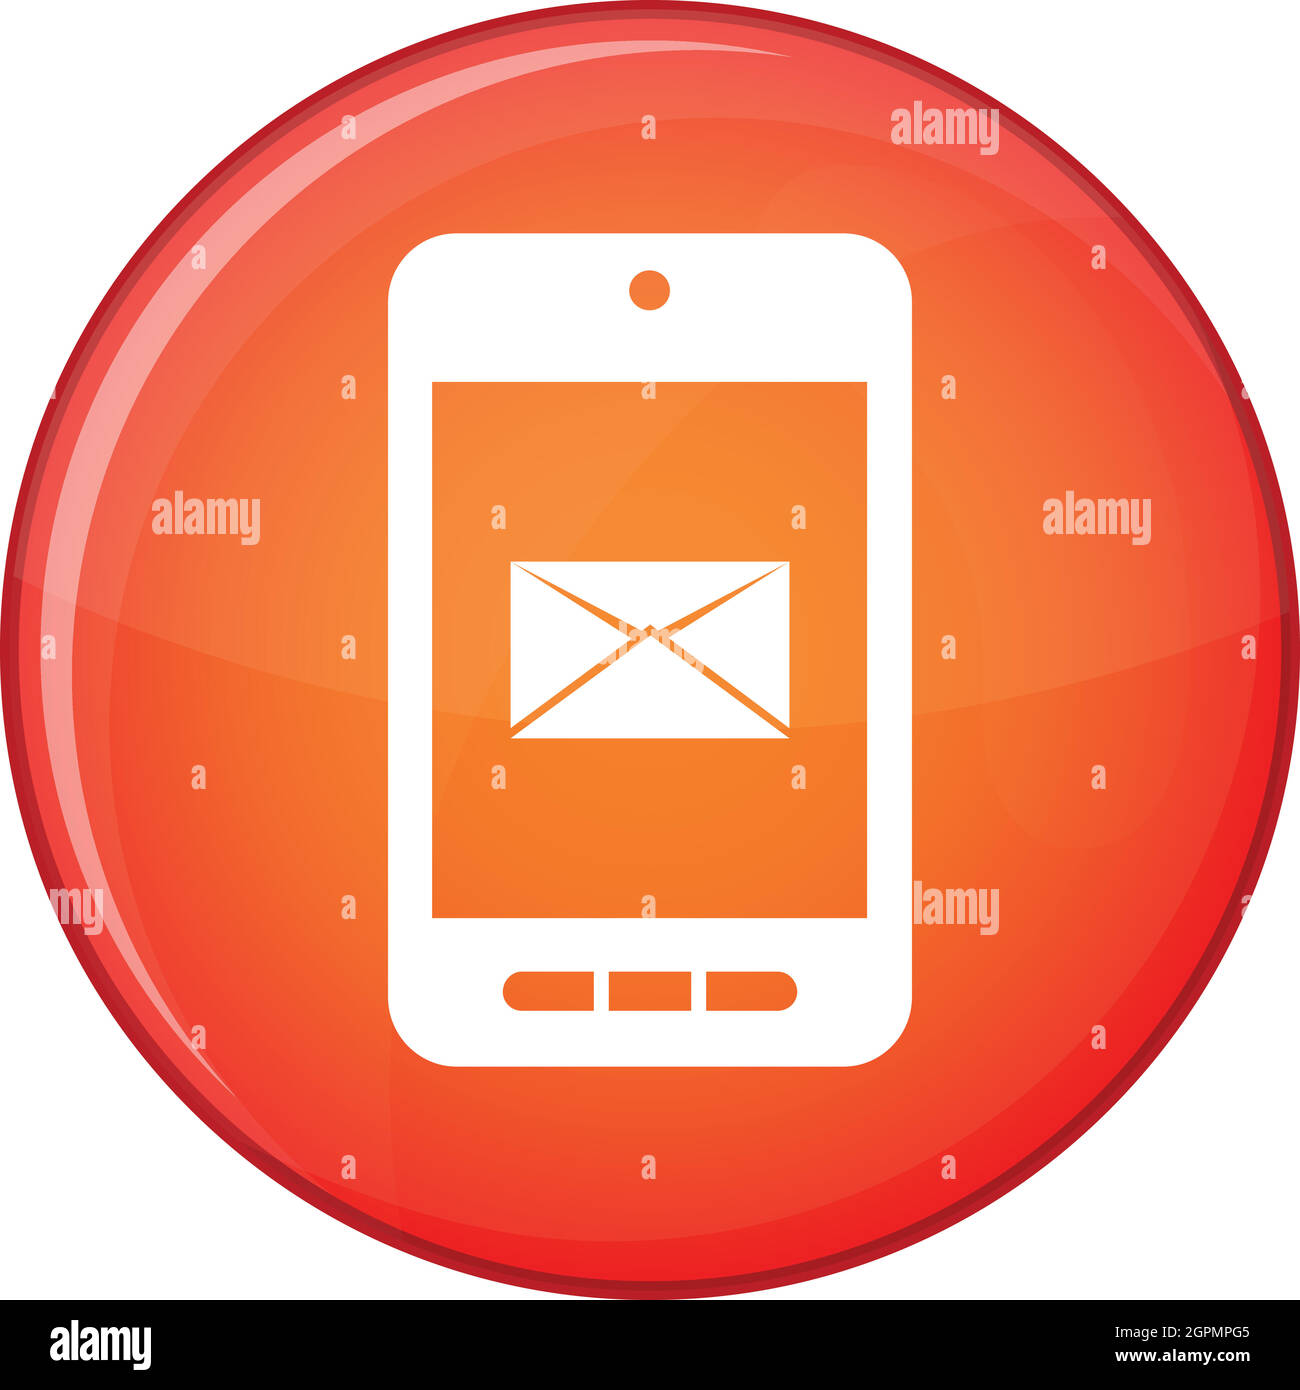 Smartphone with email symbol on the screen icon Stock Vector